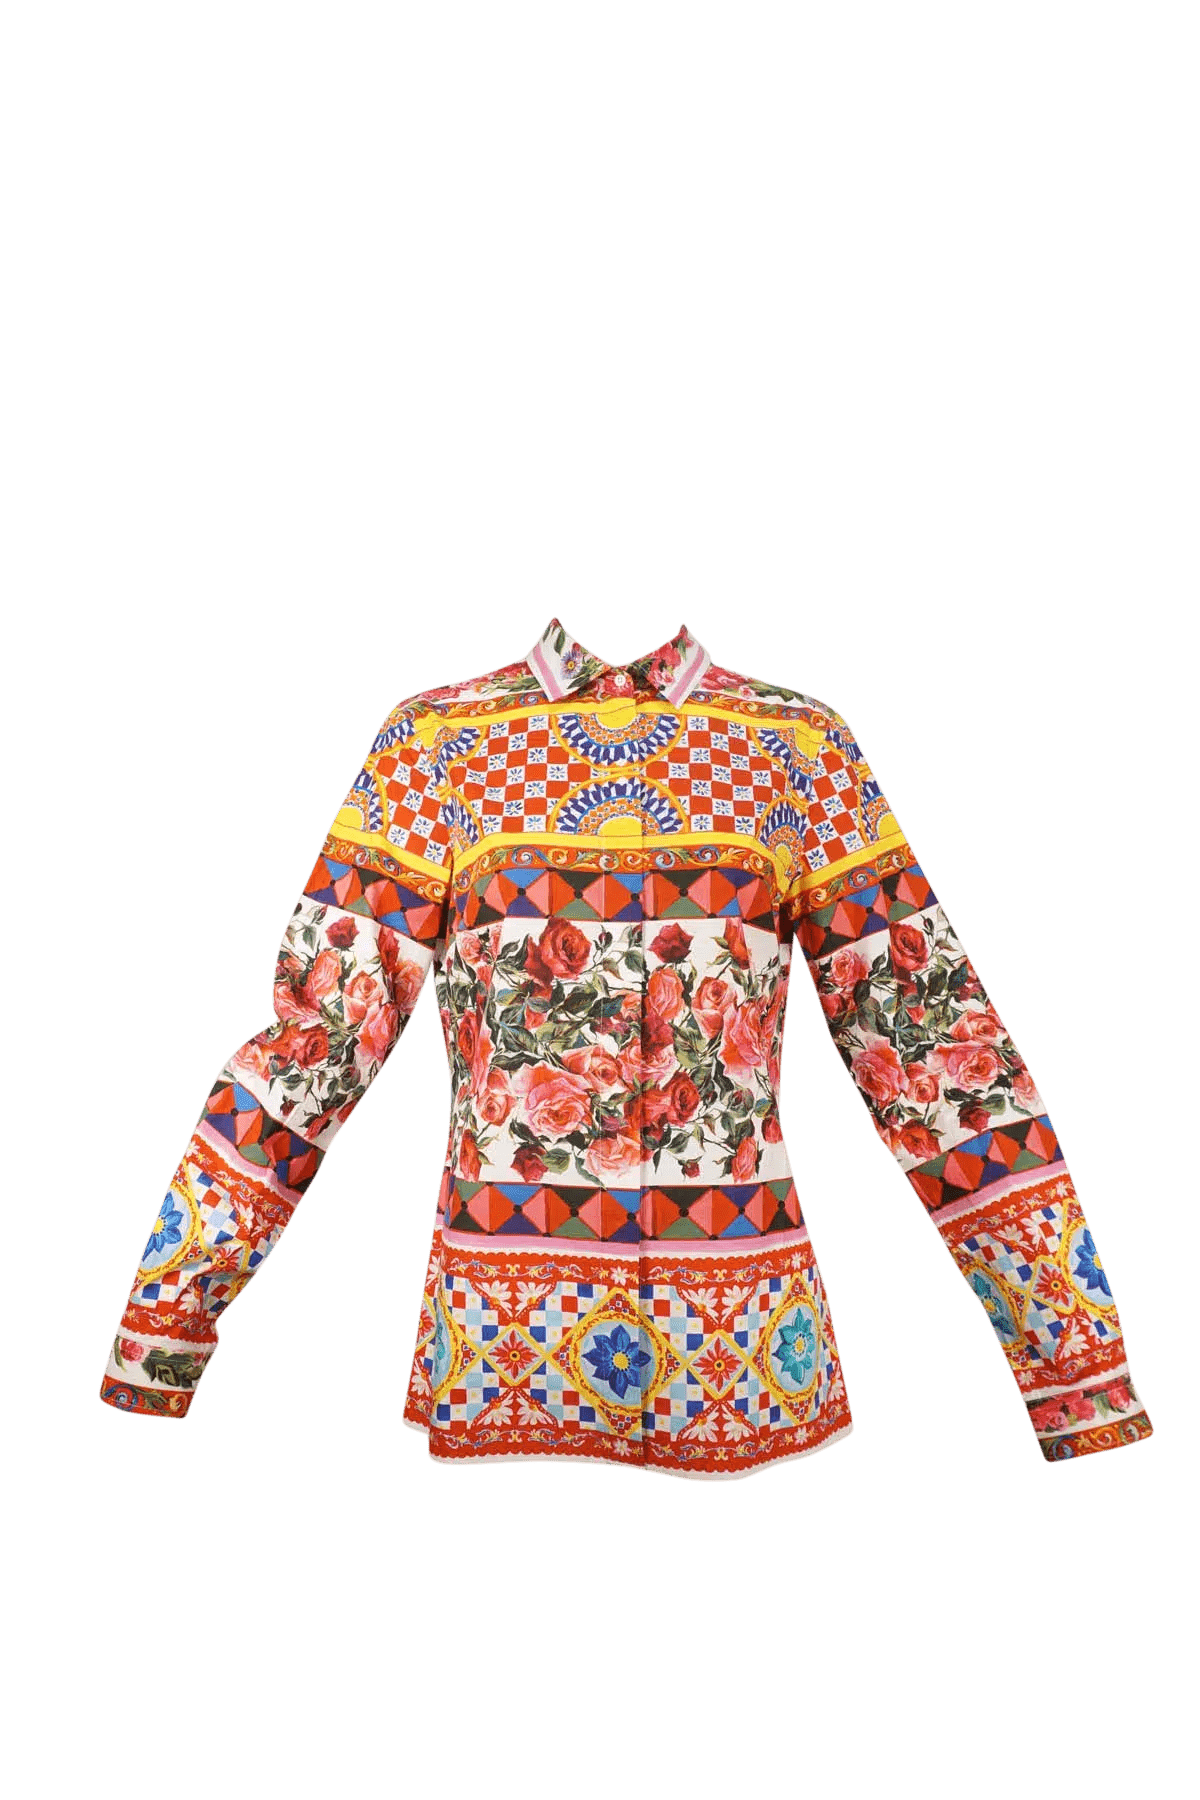 Dolce & Gabbana Multi-Color Italy Mixed Print Blouse Shirt - Foxy Couture Carmel